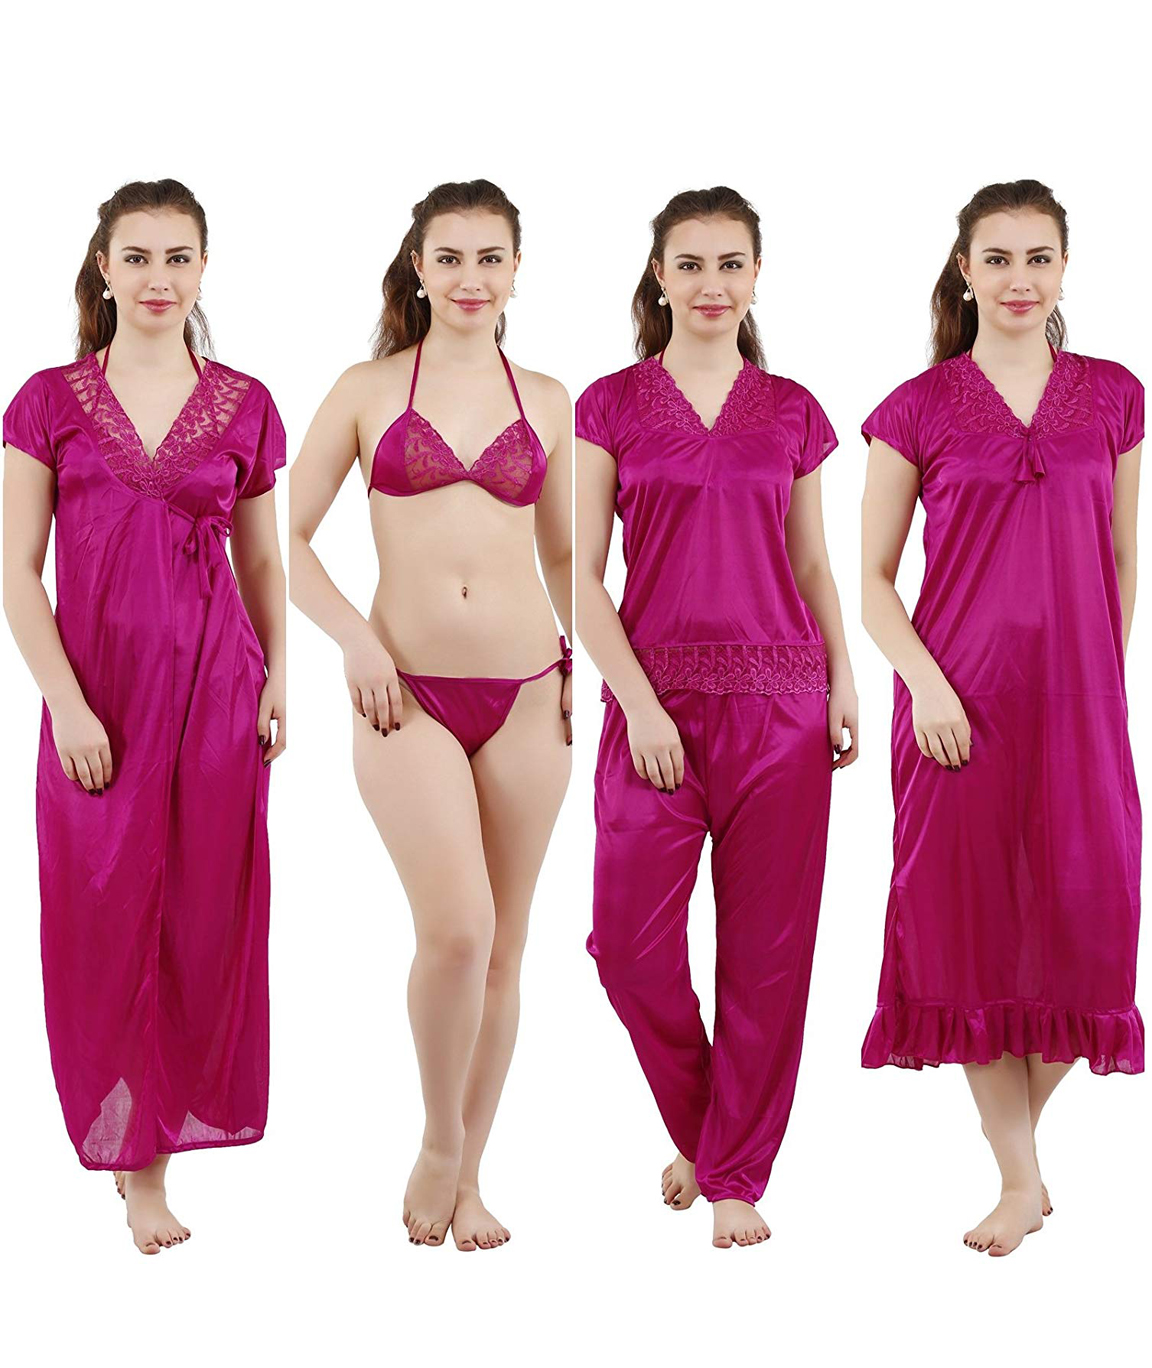 Romaisa Women`s Satin Nighty, Wrap Gown, Top, Pajama, Bra and Thong (Size -  Small, Medium, Large) (Pack of 6) COLOUR : MAGENTA